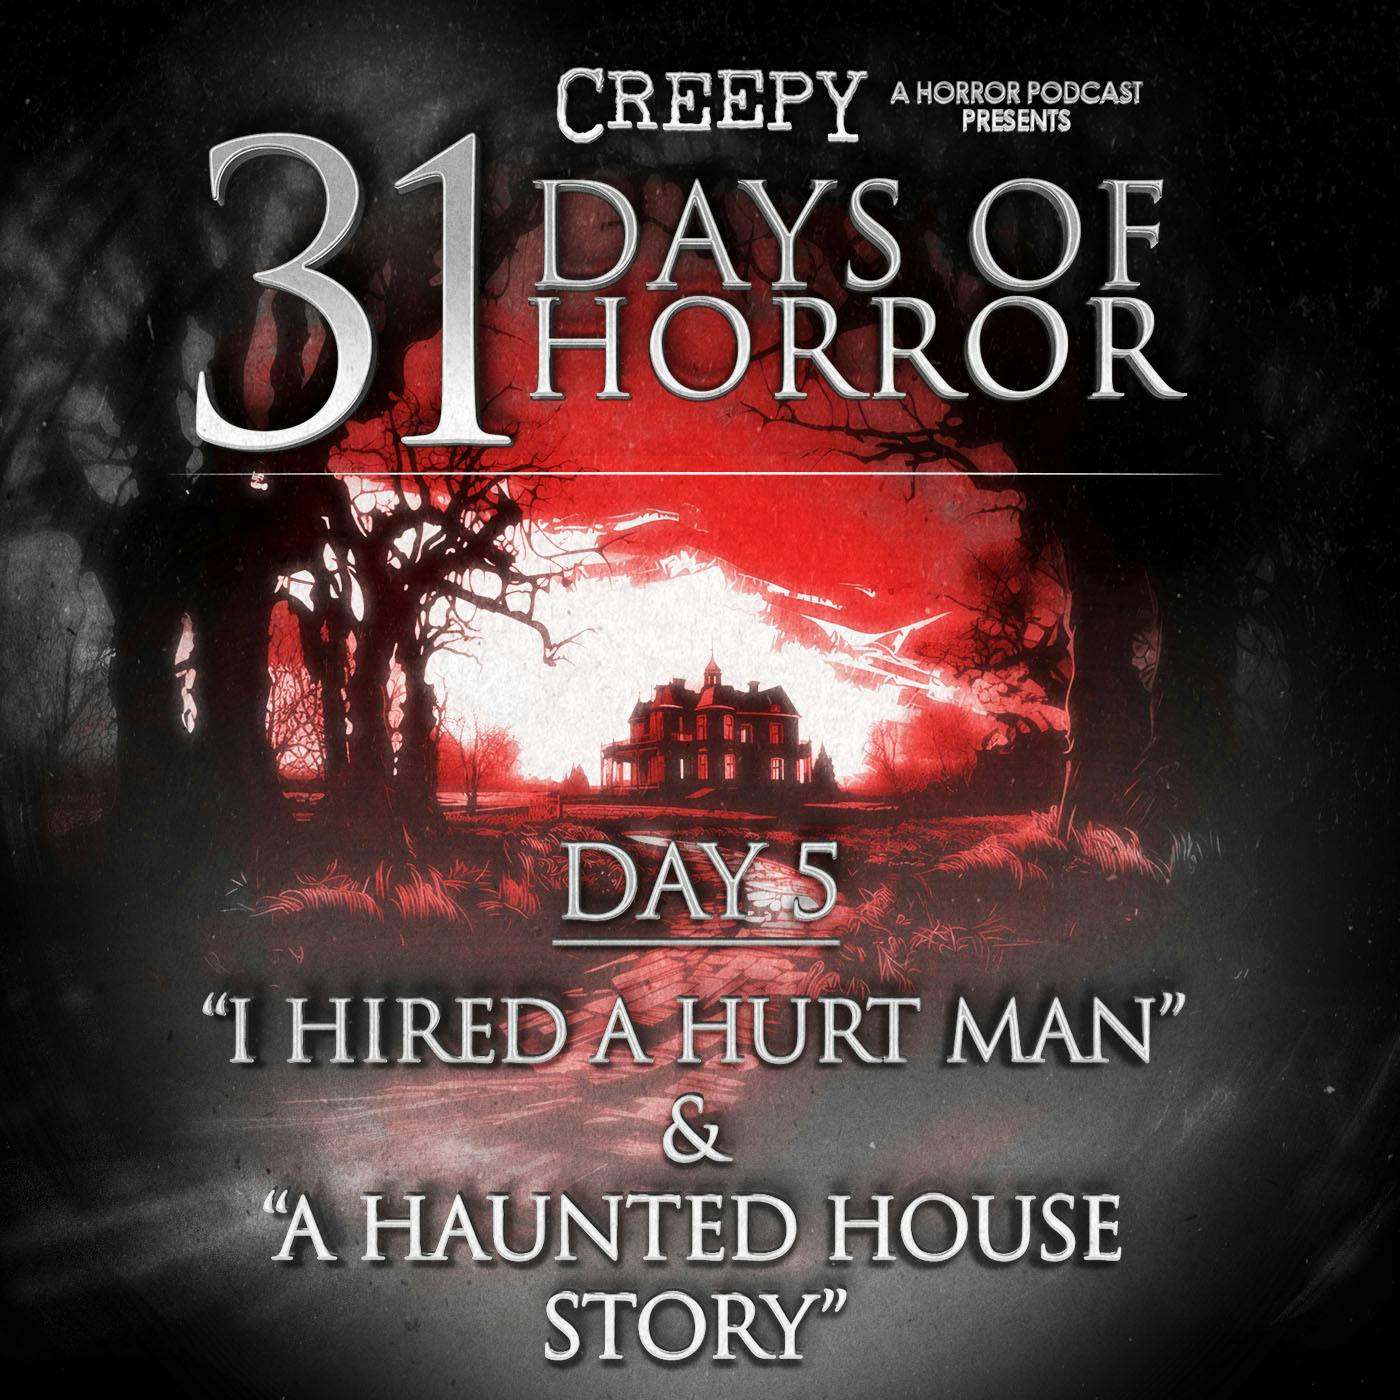 Day 5 - I Hired a Hurt Man & A Haunted House Story